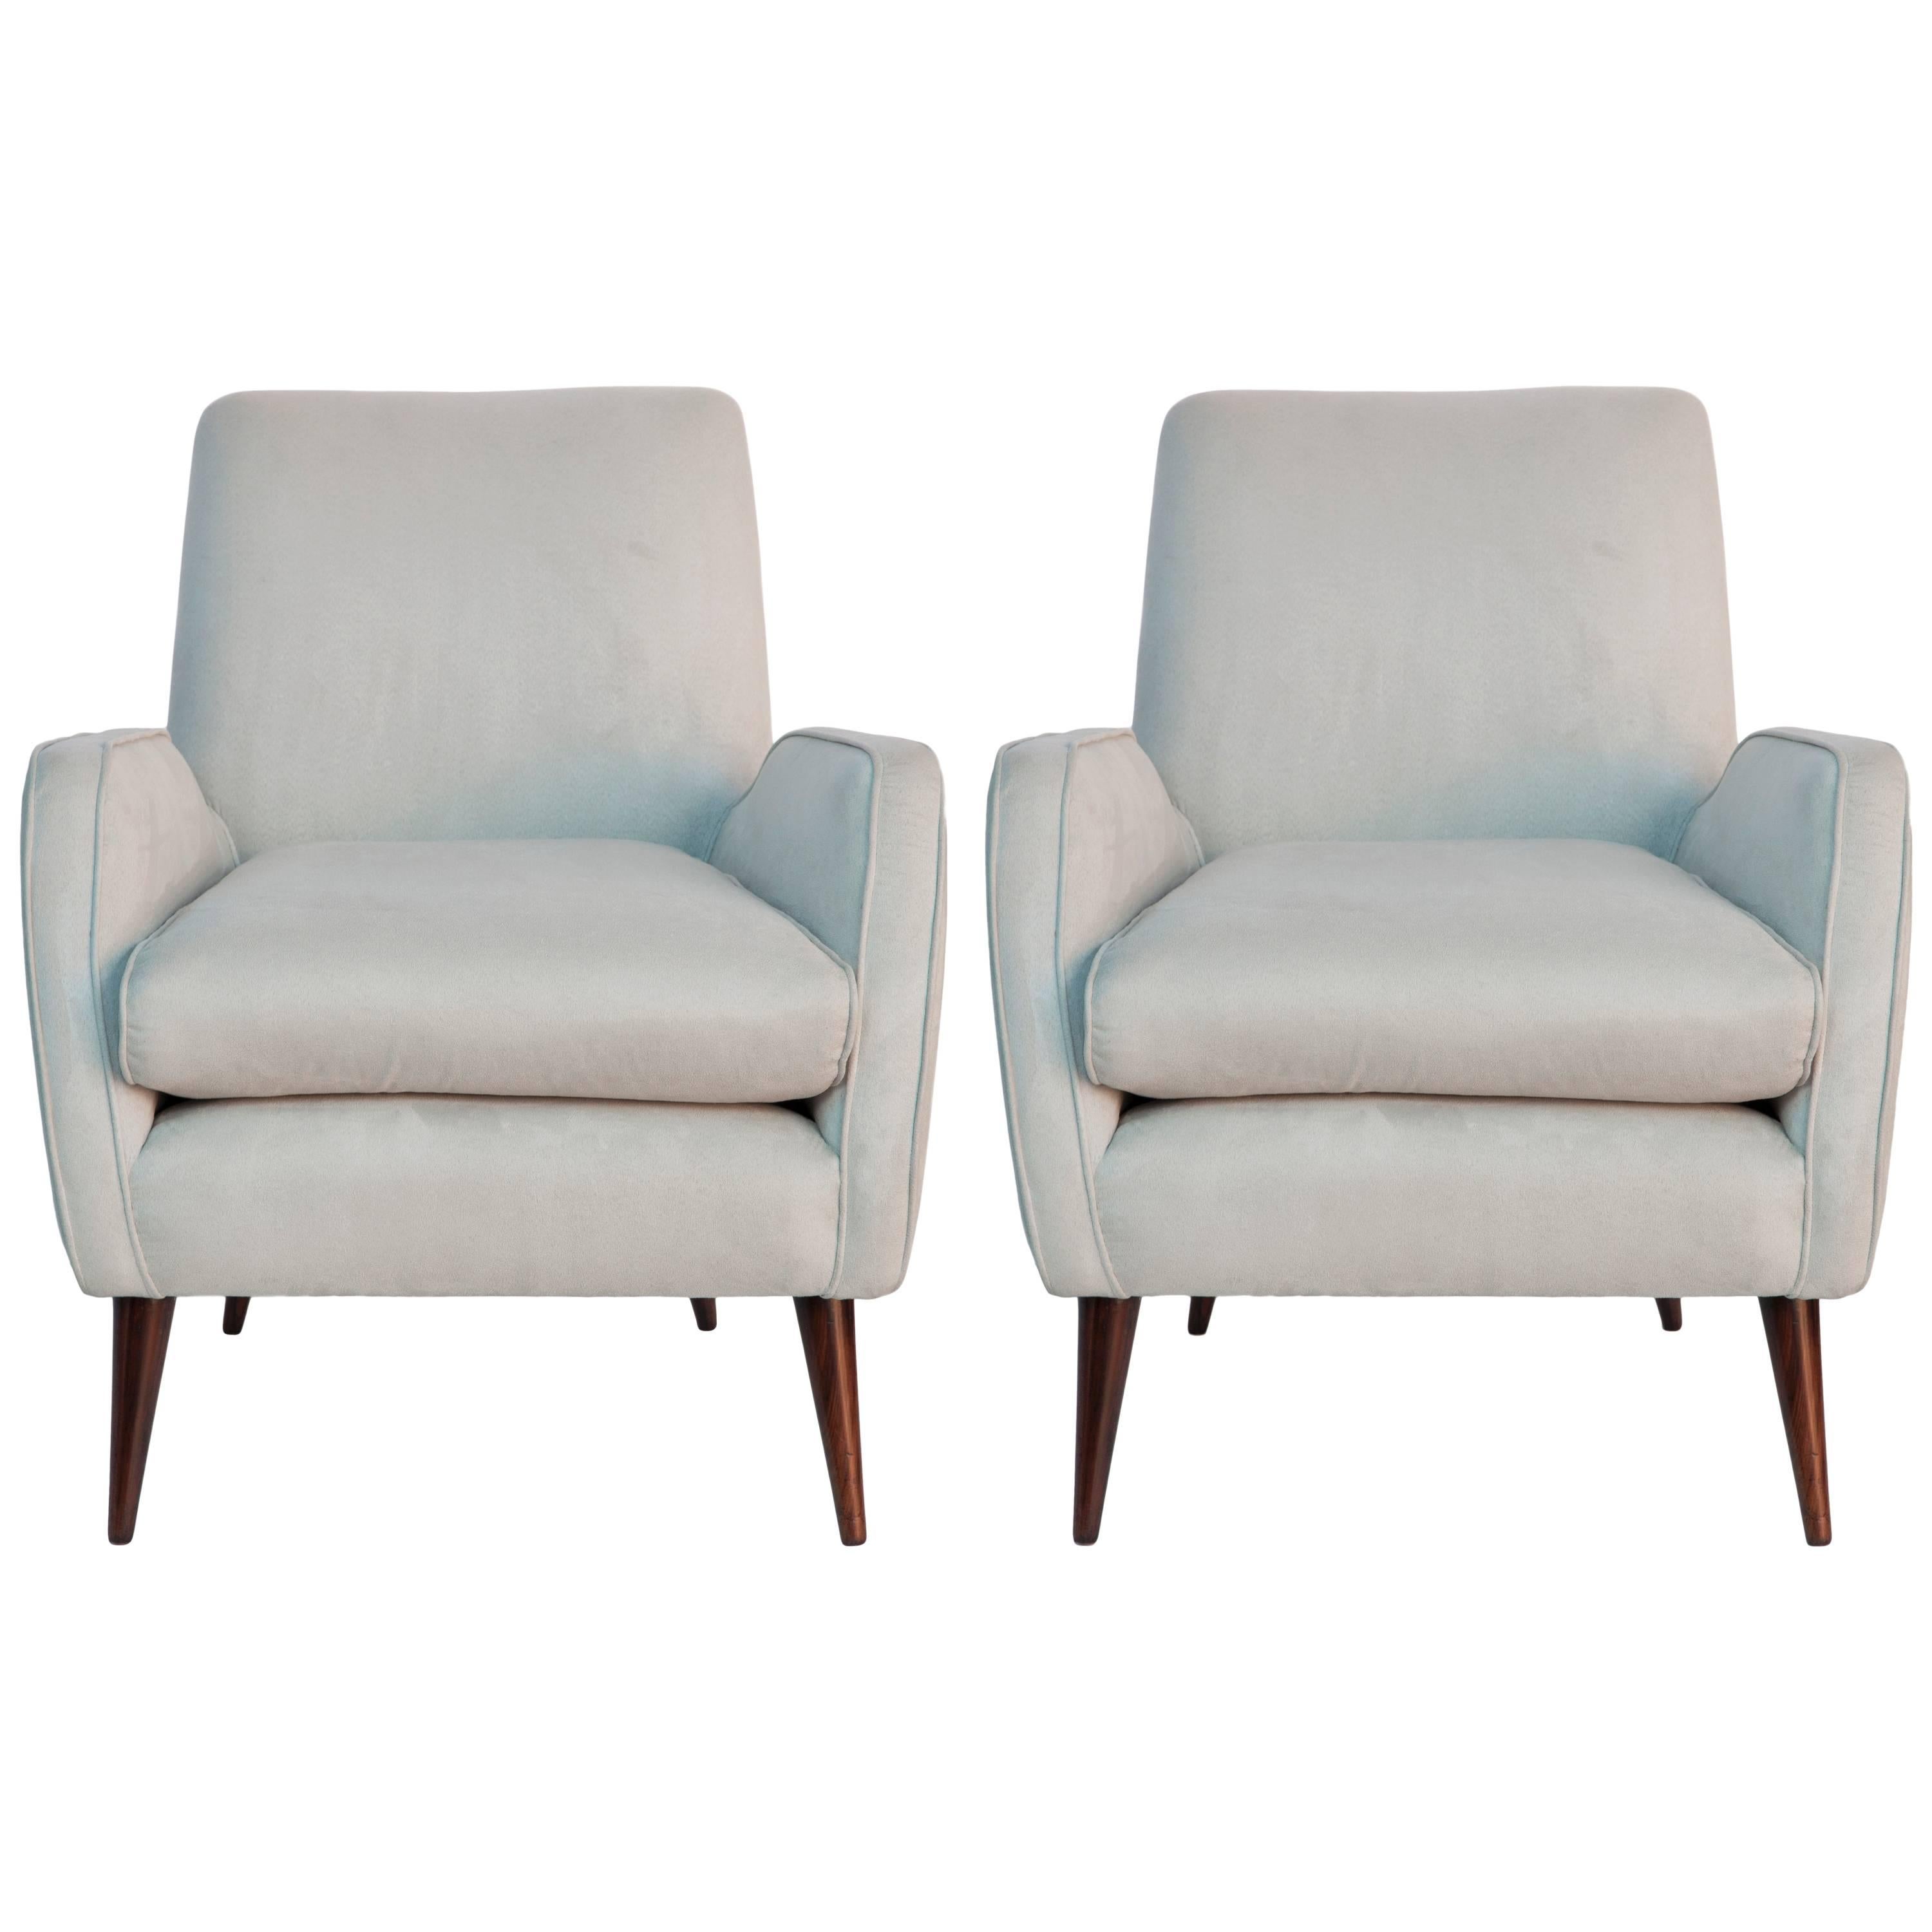 A pair of Mid-Century Modern high back armchairs by Brazilian designer Joaquim Tenreiro, manufactured circa 1960s, upholstered in faux suede, with brass nailhead trim to backs, raised on tapered jacaranda wood legs. Very good vintage condition,